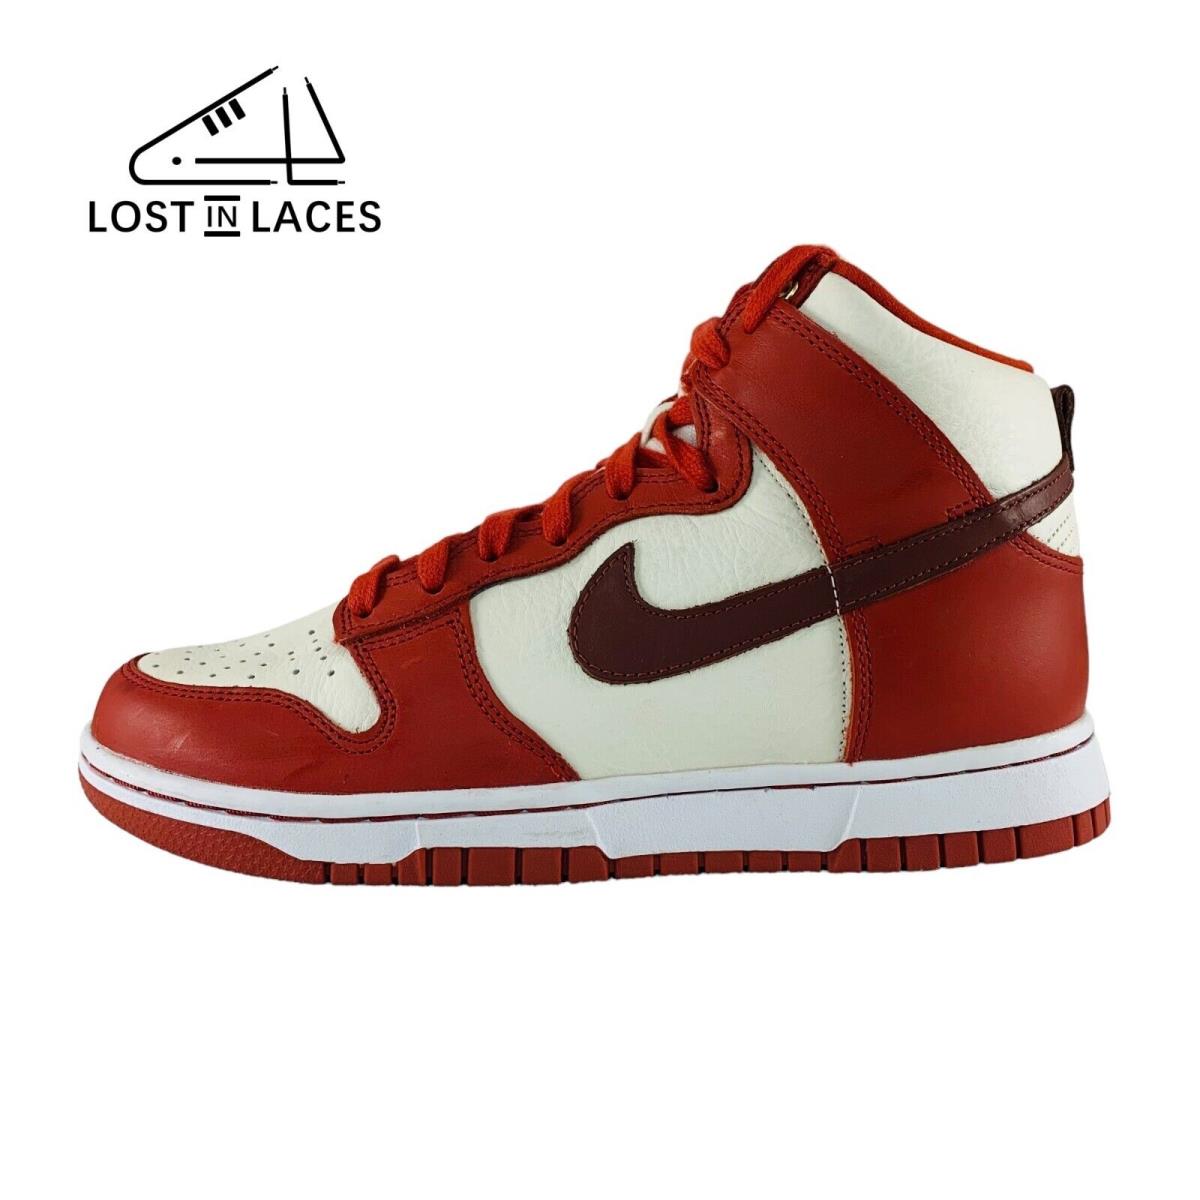 Nike Dunk High Lxx Cinnabar Red White Sneakers Shoes Women`s Sizes - Red